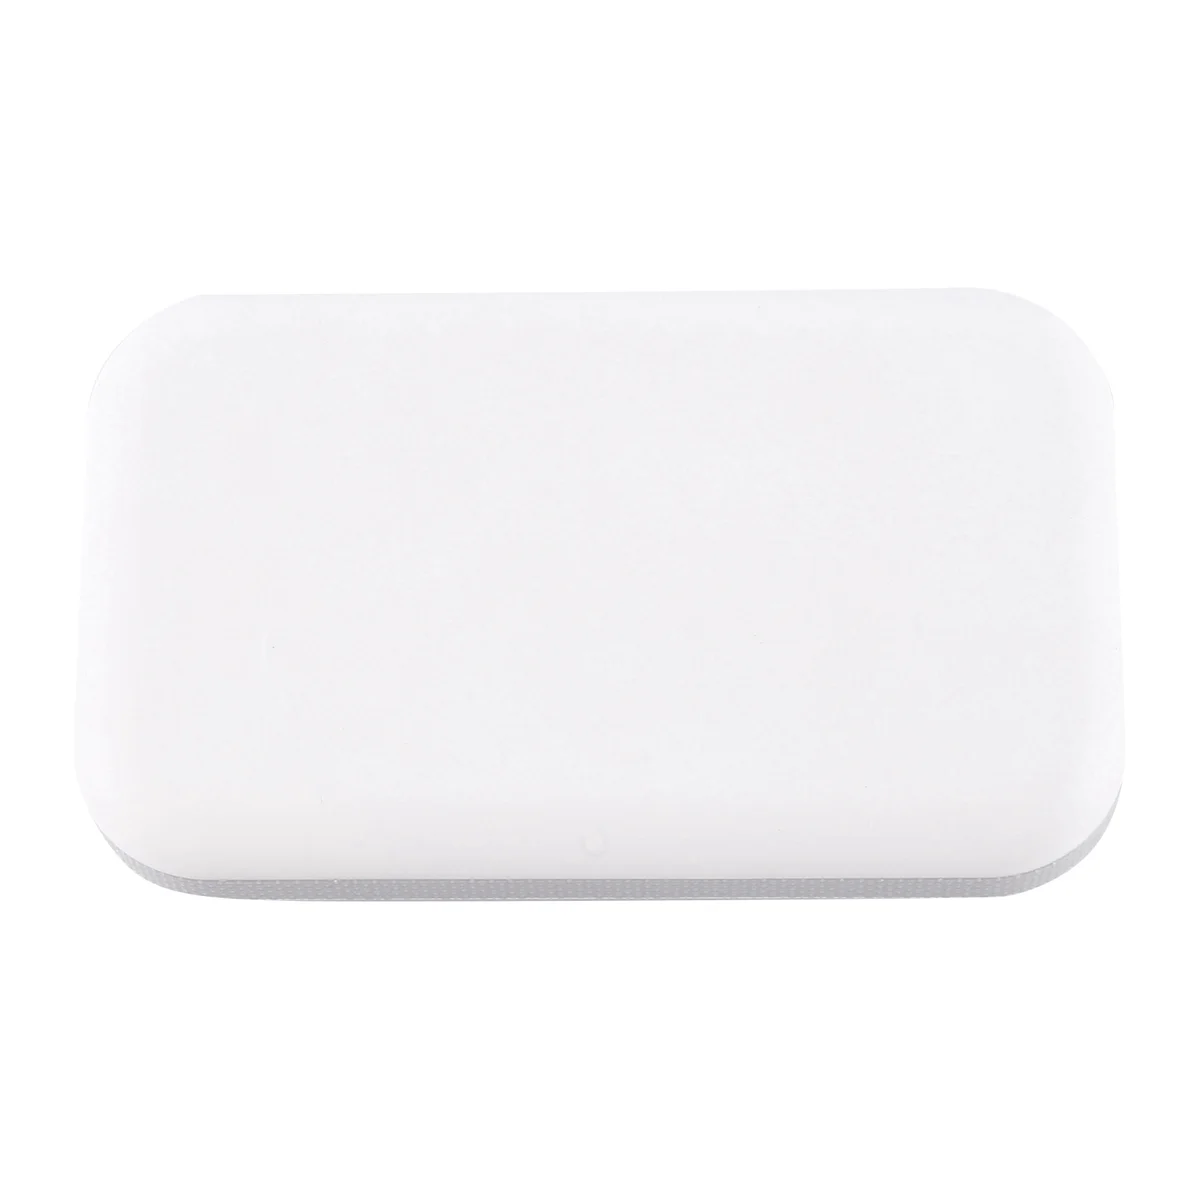 4G MiFi WiFi Router 150Mbps WiFi Modem Car Mobile Wifi Wireless Hotspot Wireless MiFi with Sim Card Slot images - 6